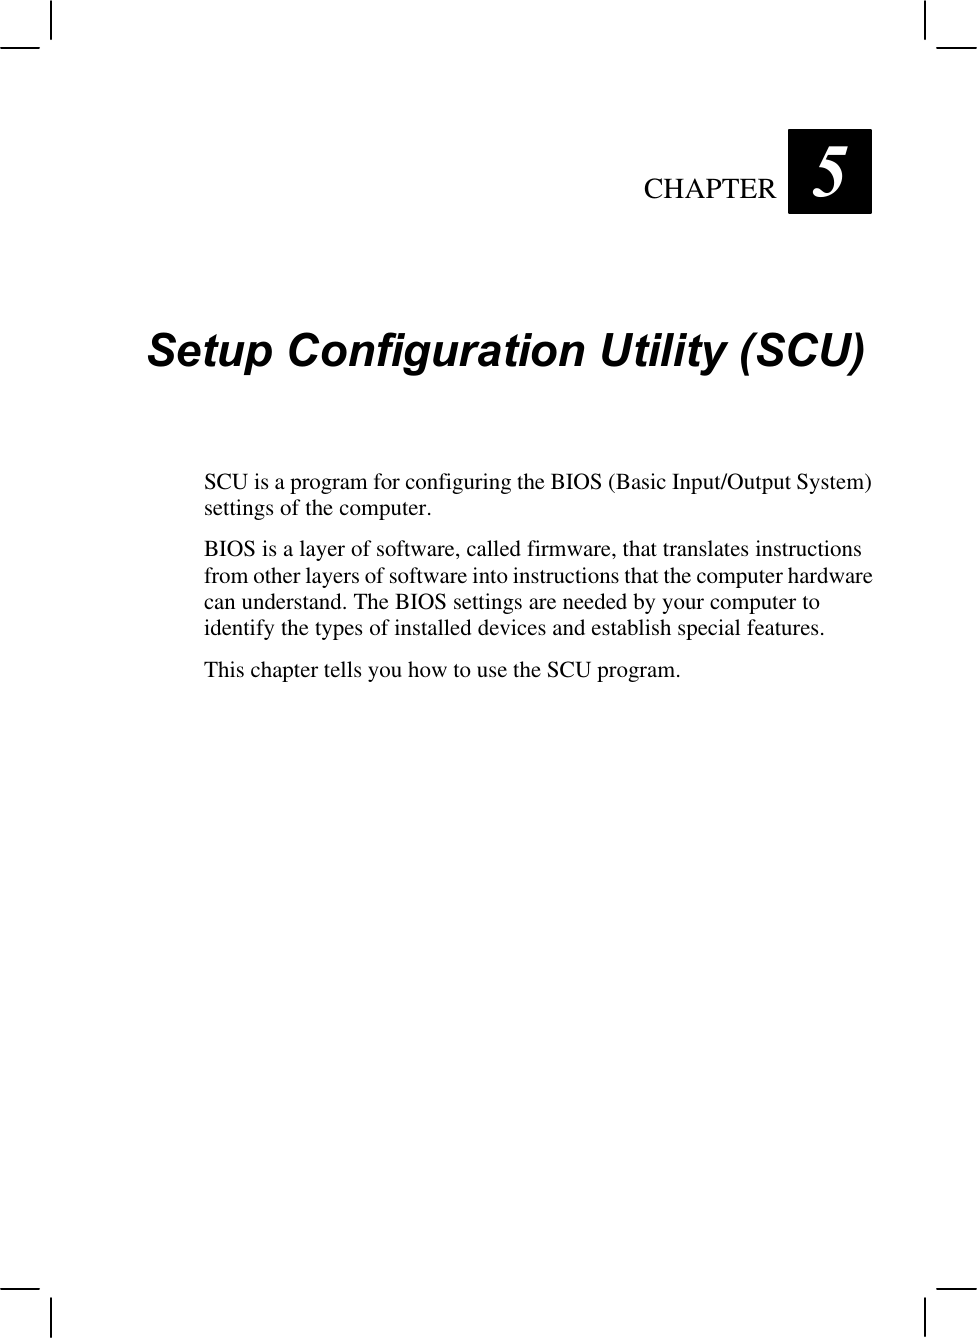 CHAPTER  5Setup Configuration Utility (SCU)SCU is a program for configuring the BIOS (Basic Input/Output System)settings of the computer.BIOS is a layer of software, called firmware, that translates instructionsfrom other layers of software into instructions that the computer hardwarecan understand. The BIOS settings are needed by your computer toidentify the types of installed devices and establish special features.This chapter tells you how to use the SCU program.